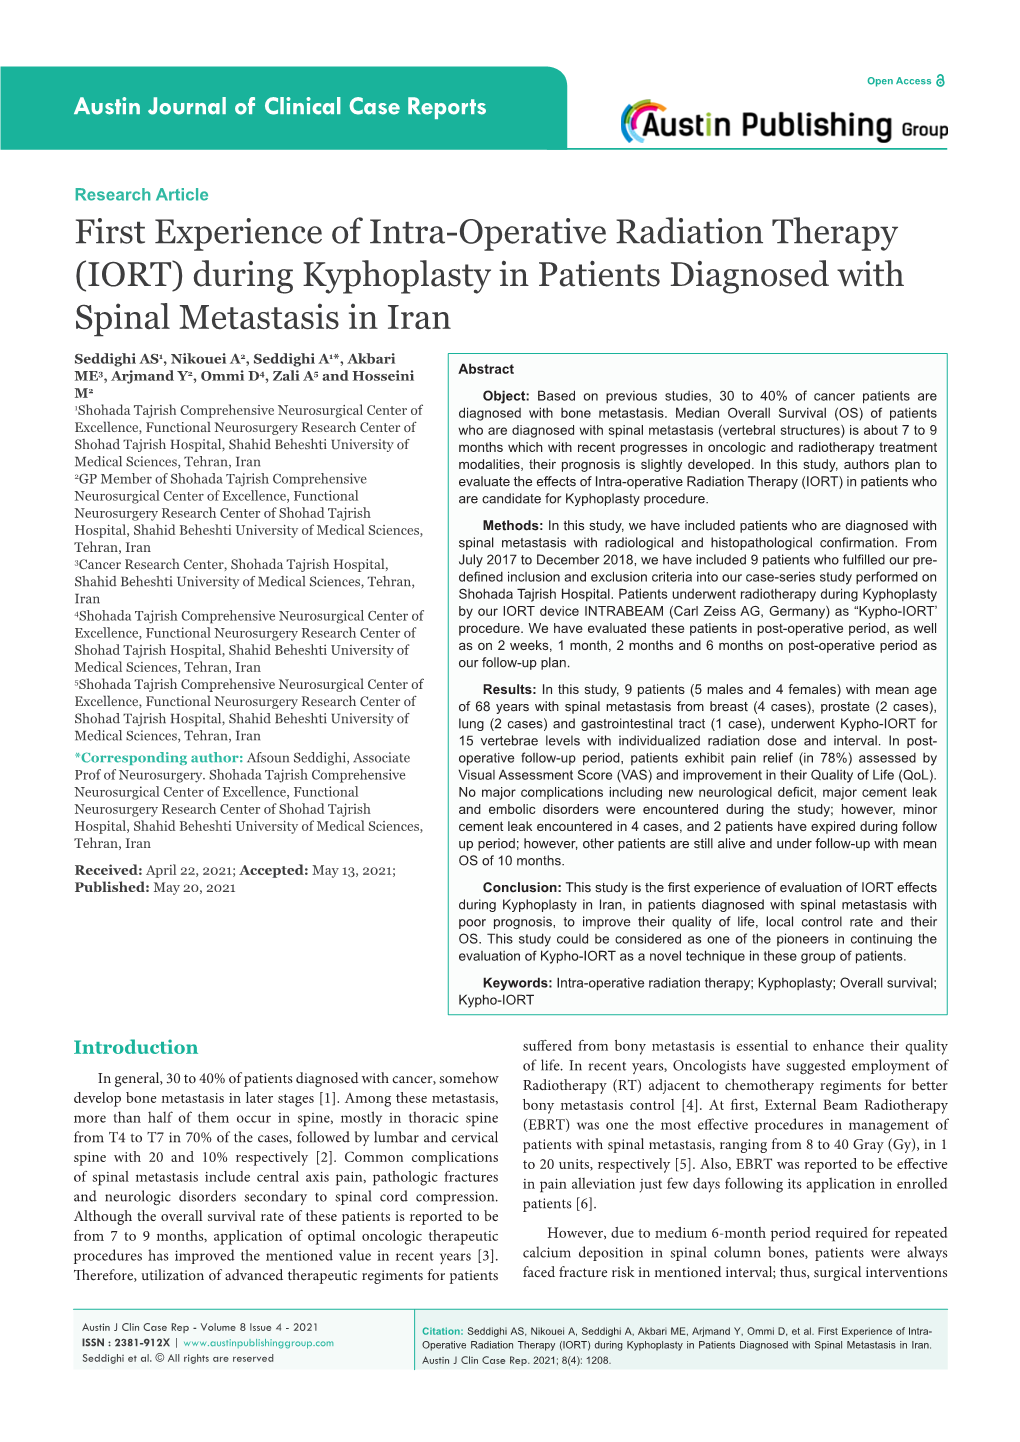 First Experience of Intra-Operative Radiation Therapy (IORT) During Kyphoplasty in Patients Diagnosed with Spinal Metastasis in Iran